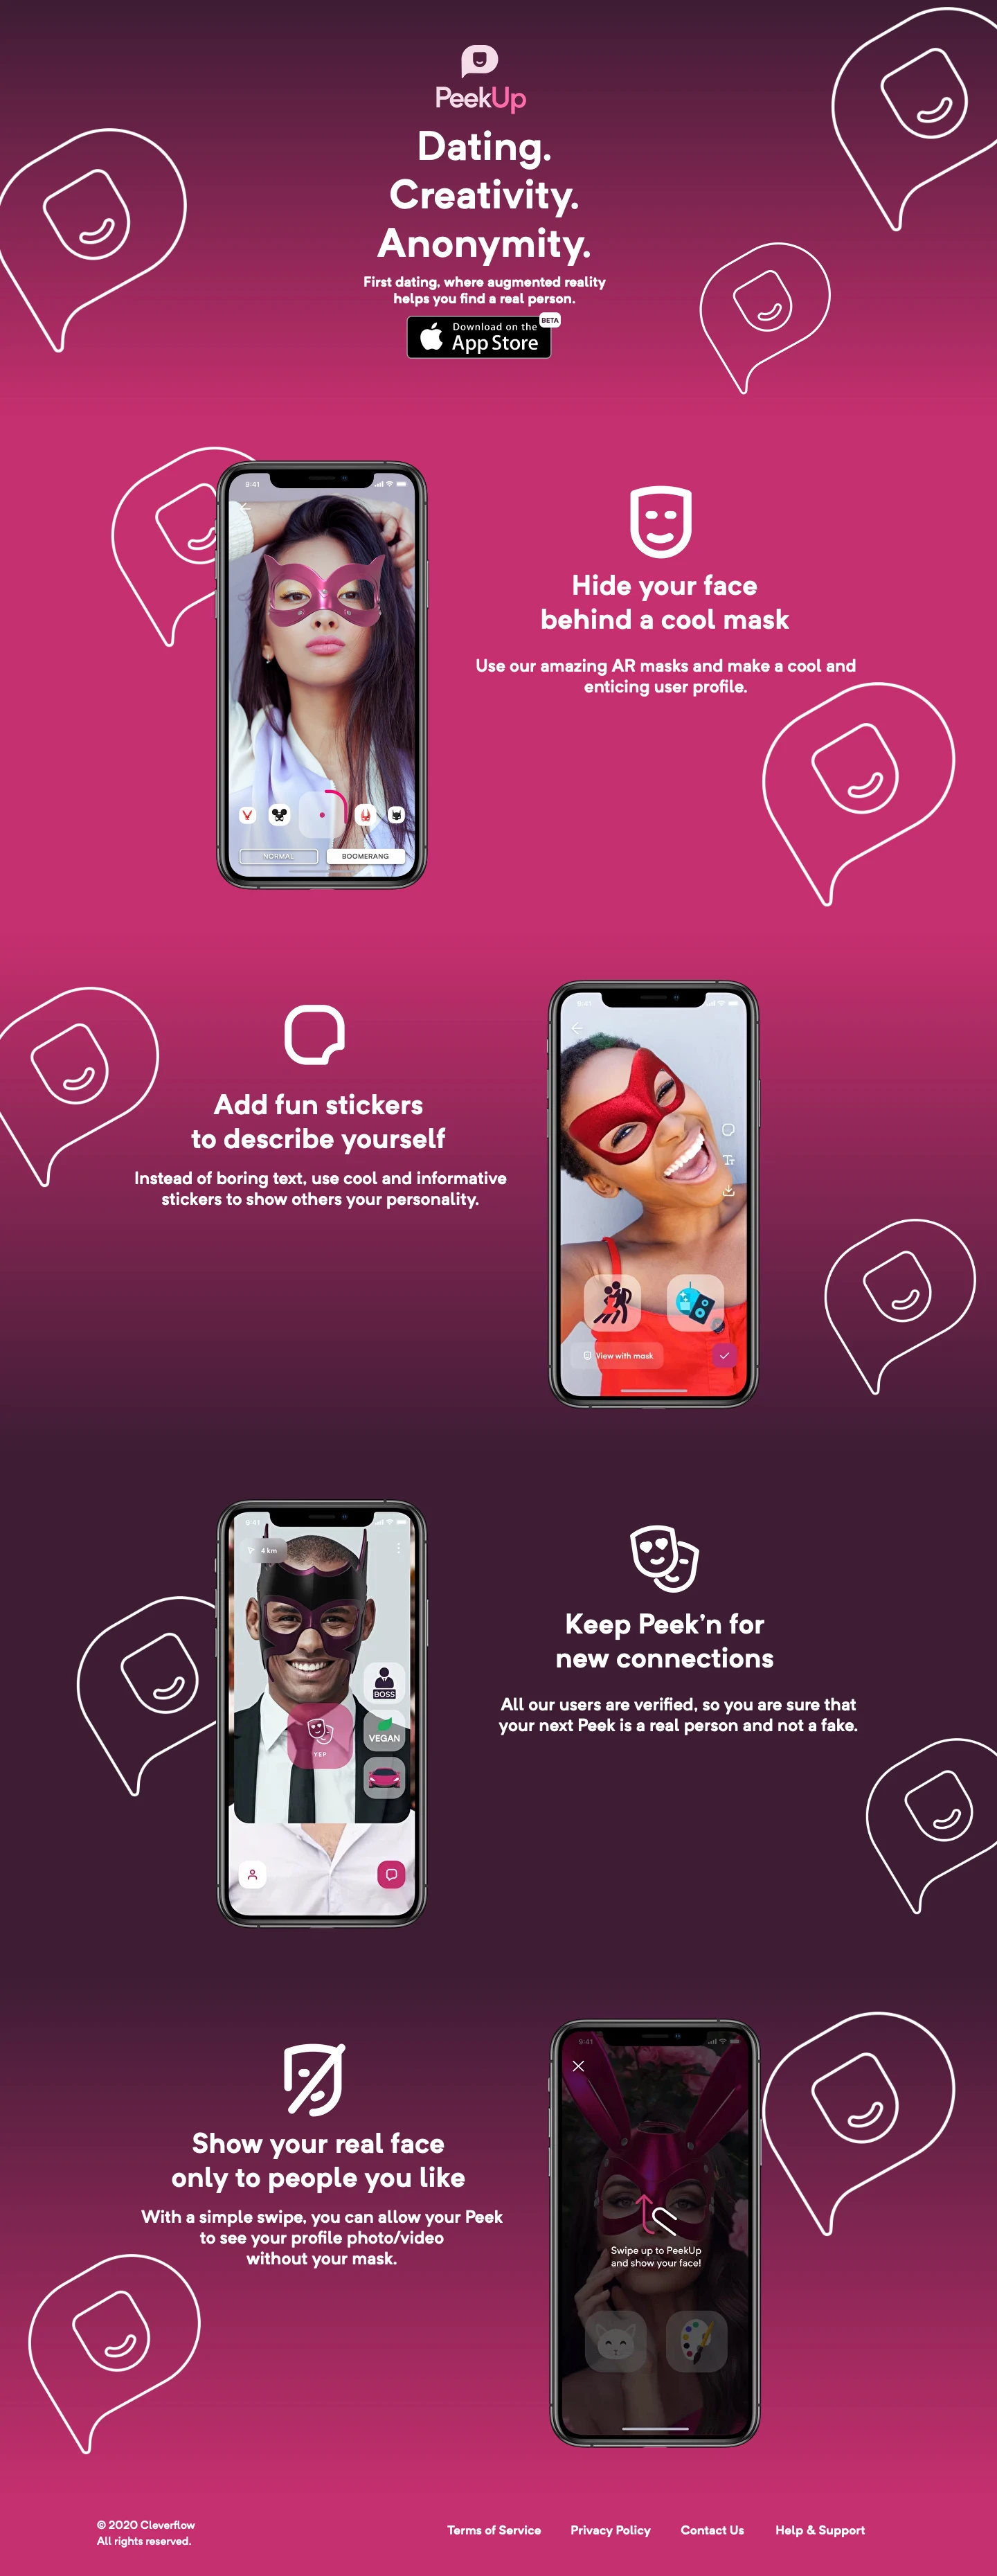 PeekUp Landing Page Example: First dating, where augmented reality helps you find real person.